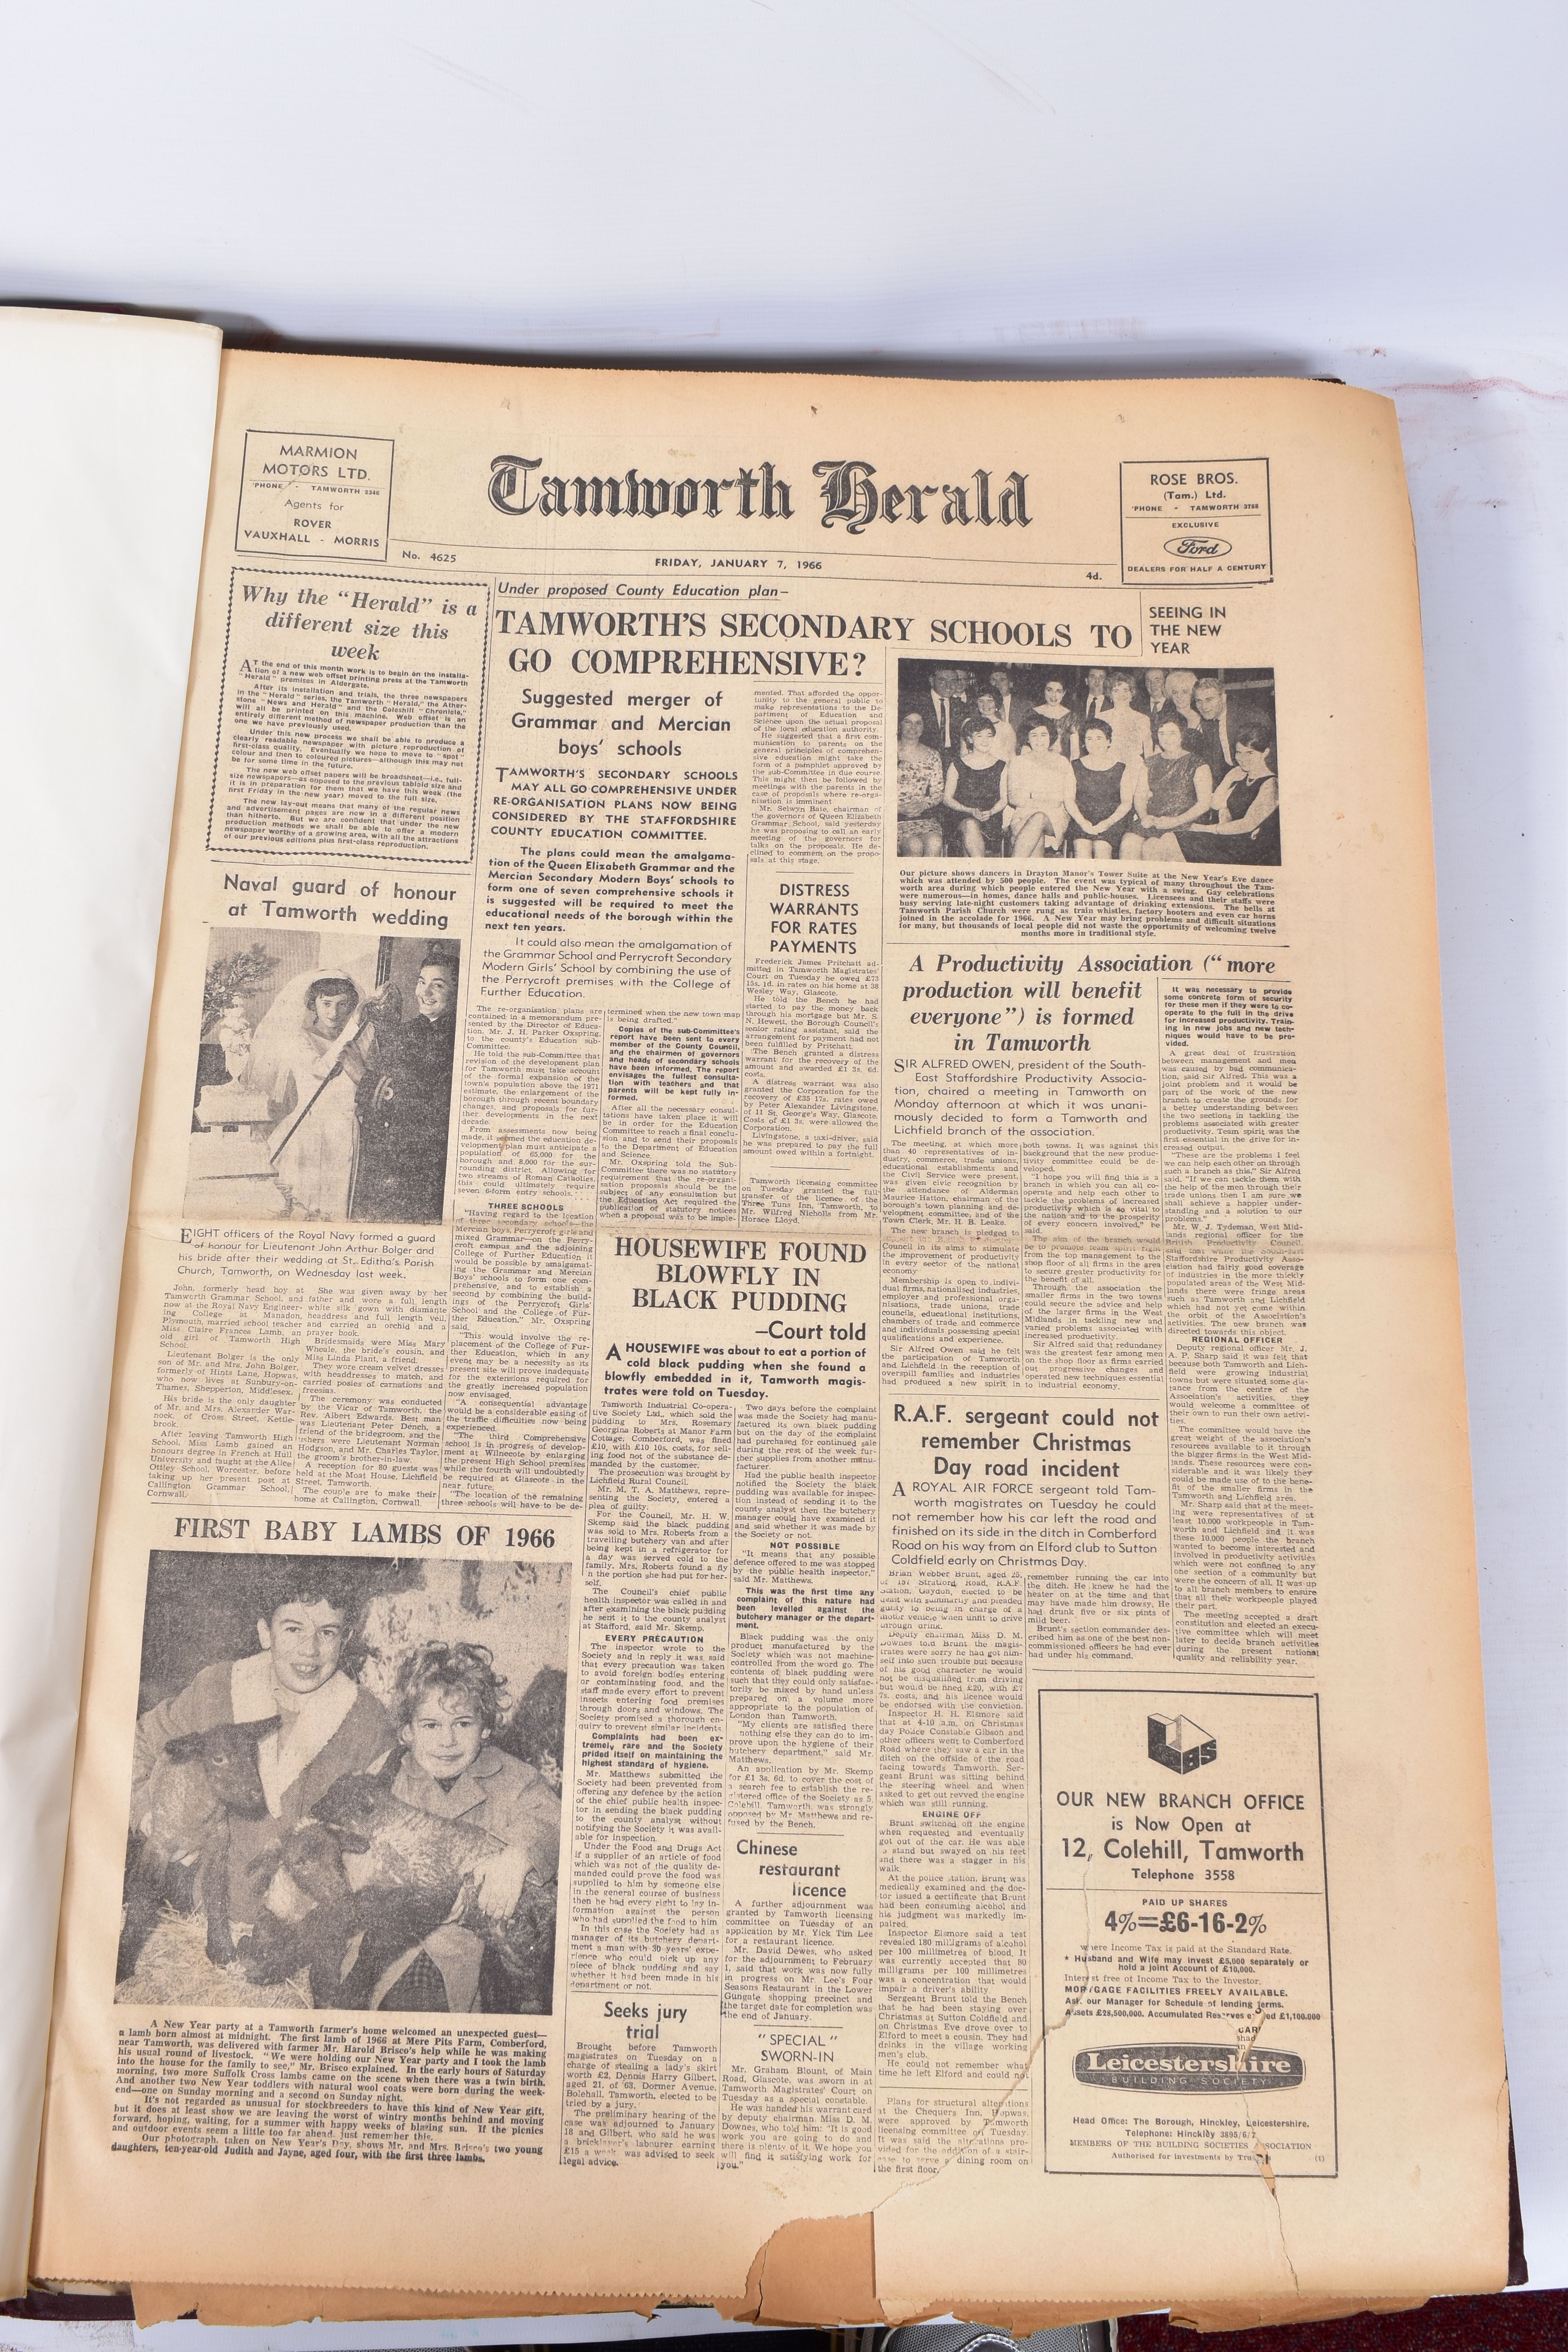 THE TAMWORTH HERALD, an Archive of the Tamworth Herald Newspaper from 1966, the newspapers are bound